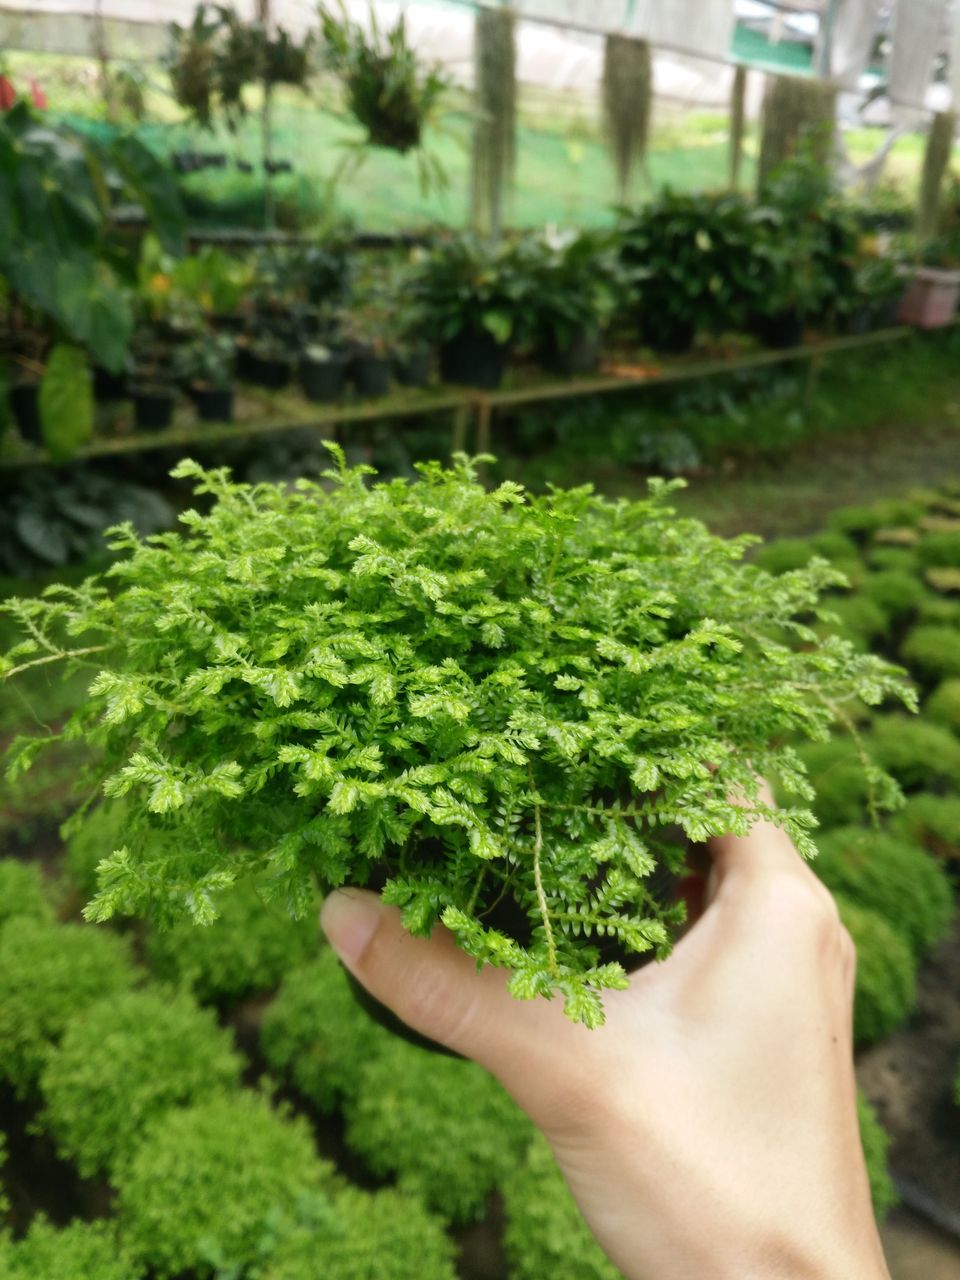 CROPPED IMAGE OF PERSON HOLDING FRESH GREEN PLANTS